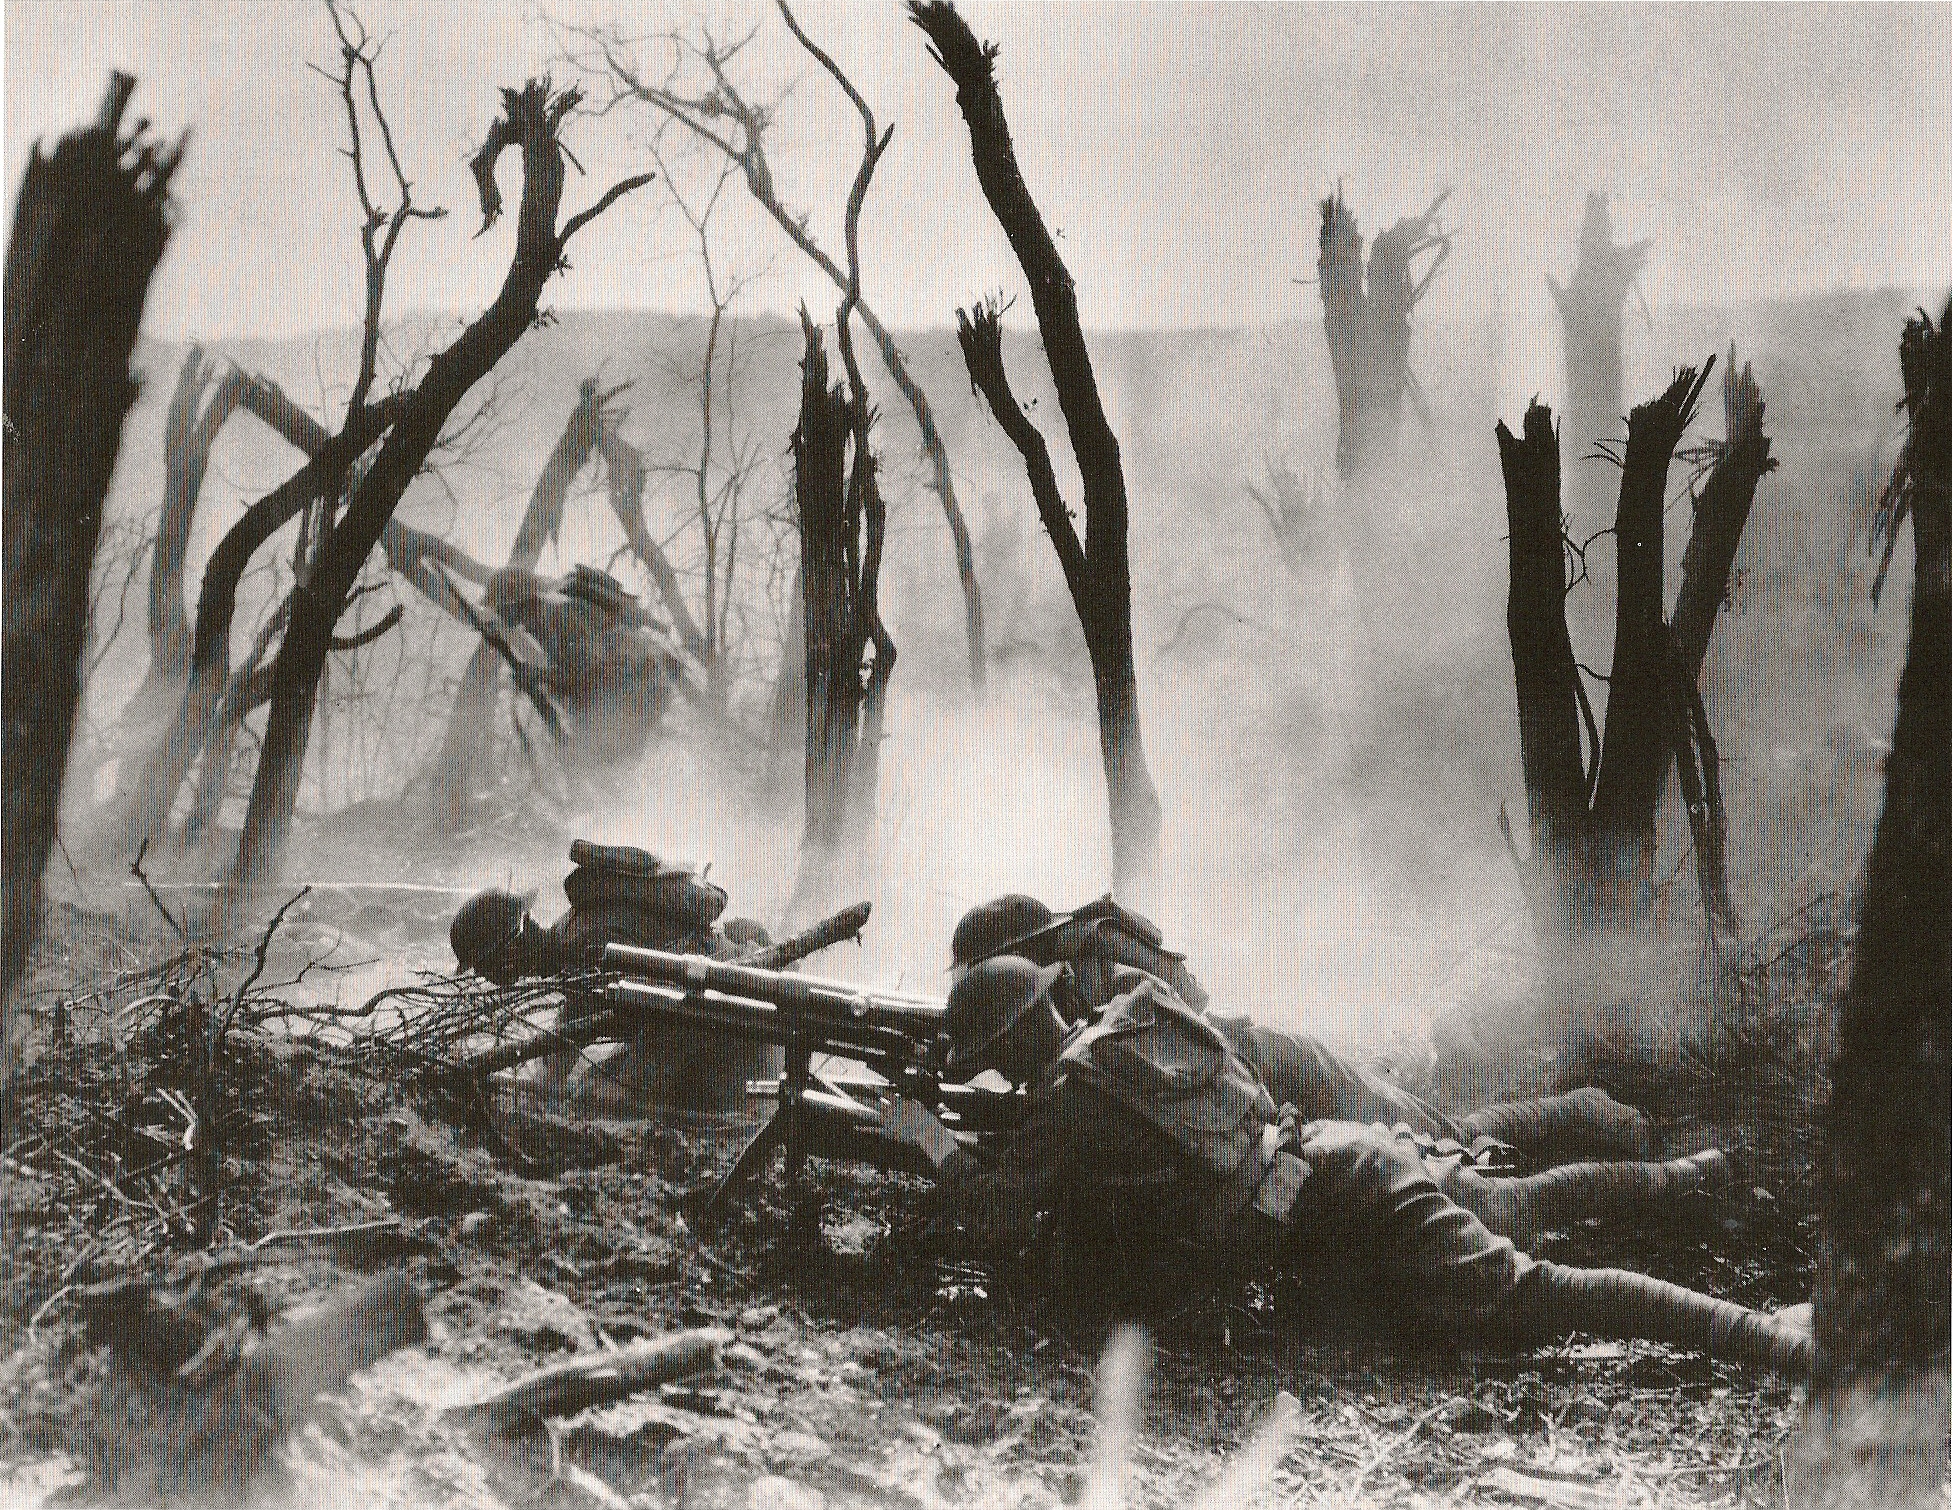 Trench Warfare In World War I Was A Smarter Strategy Than You Realise